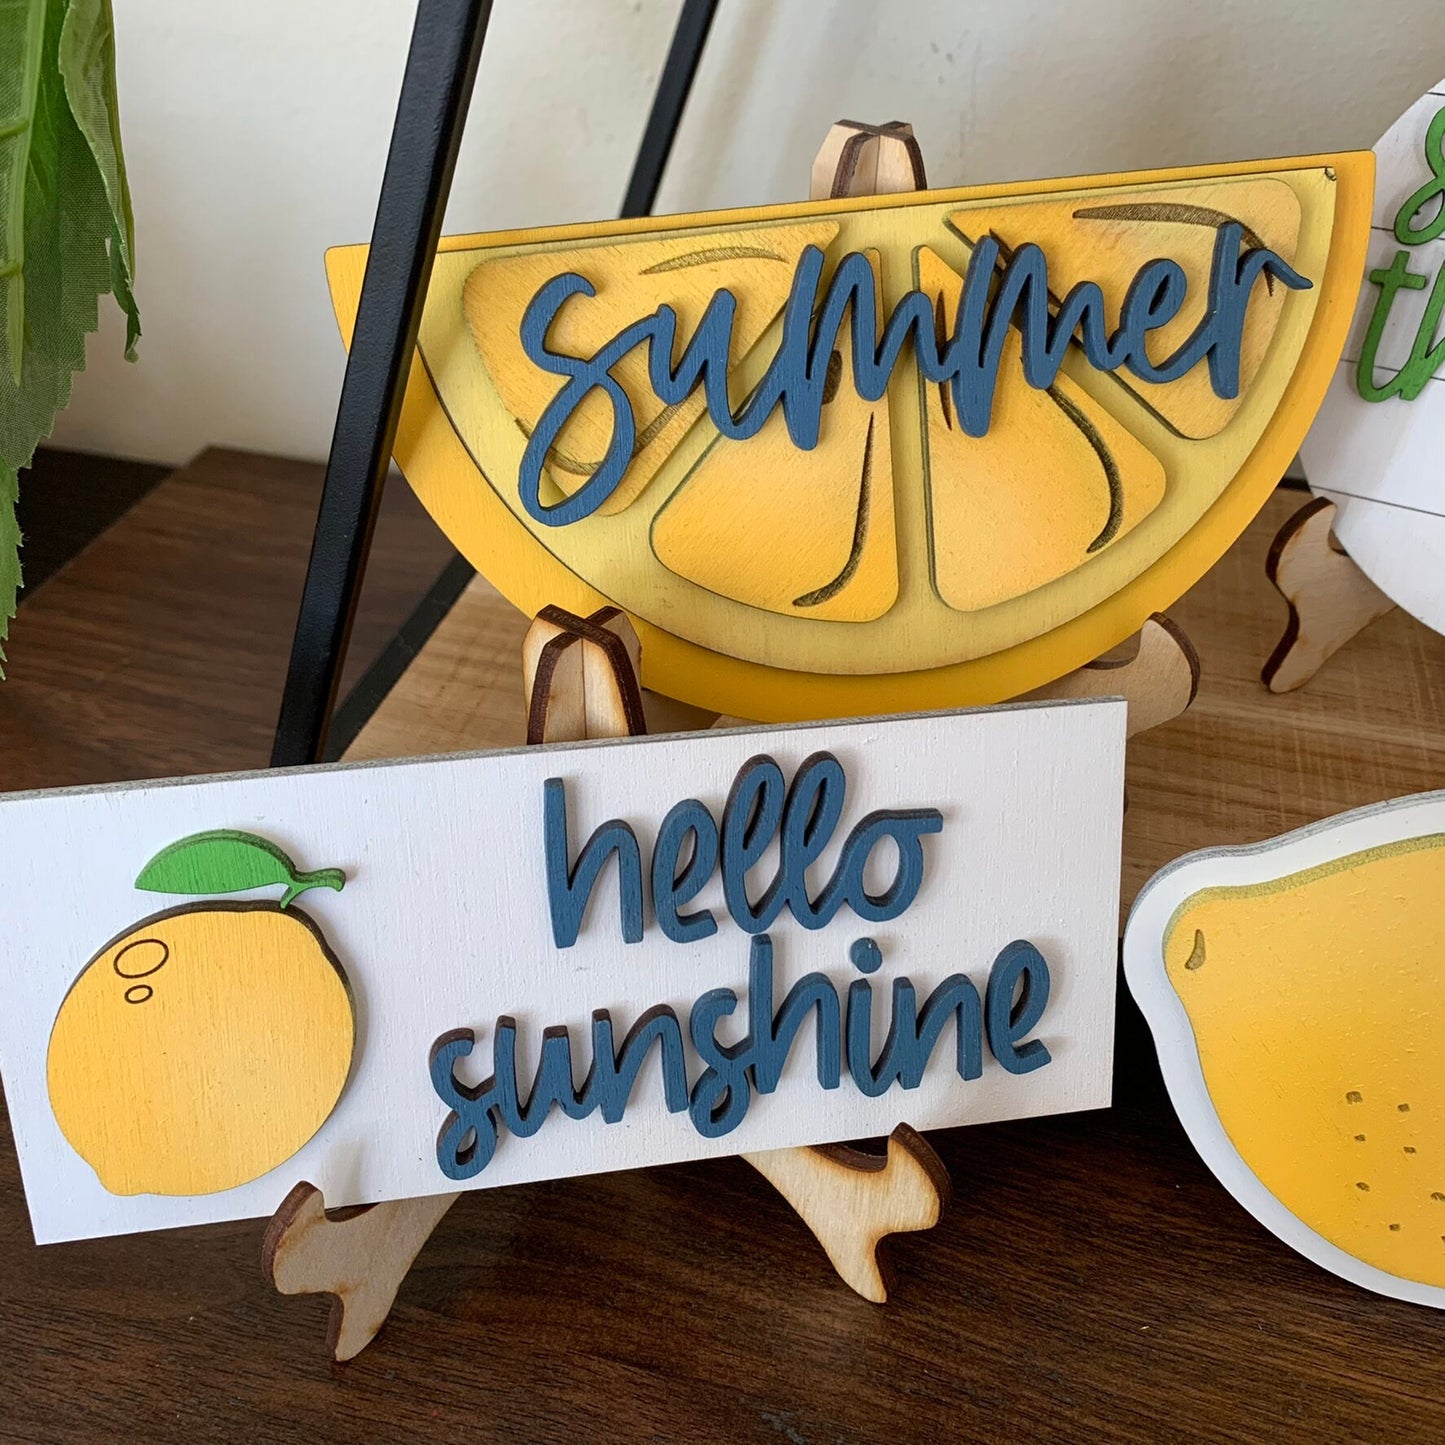 Summer Lemons Tiered Tray Decor - Laser Cut Wood Painted